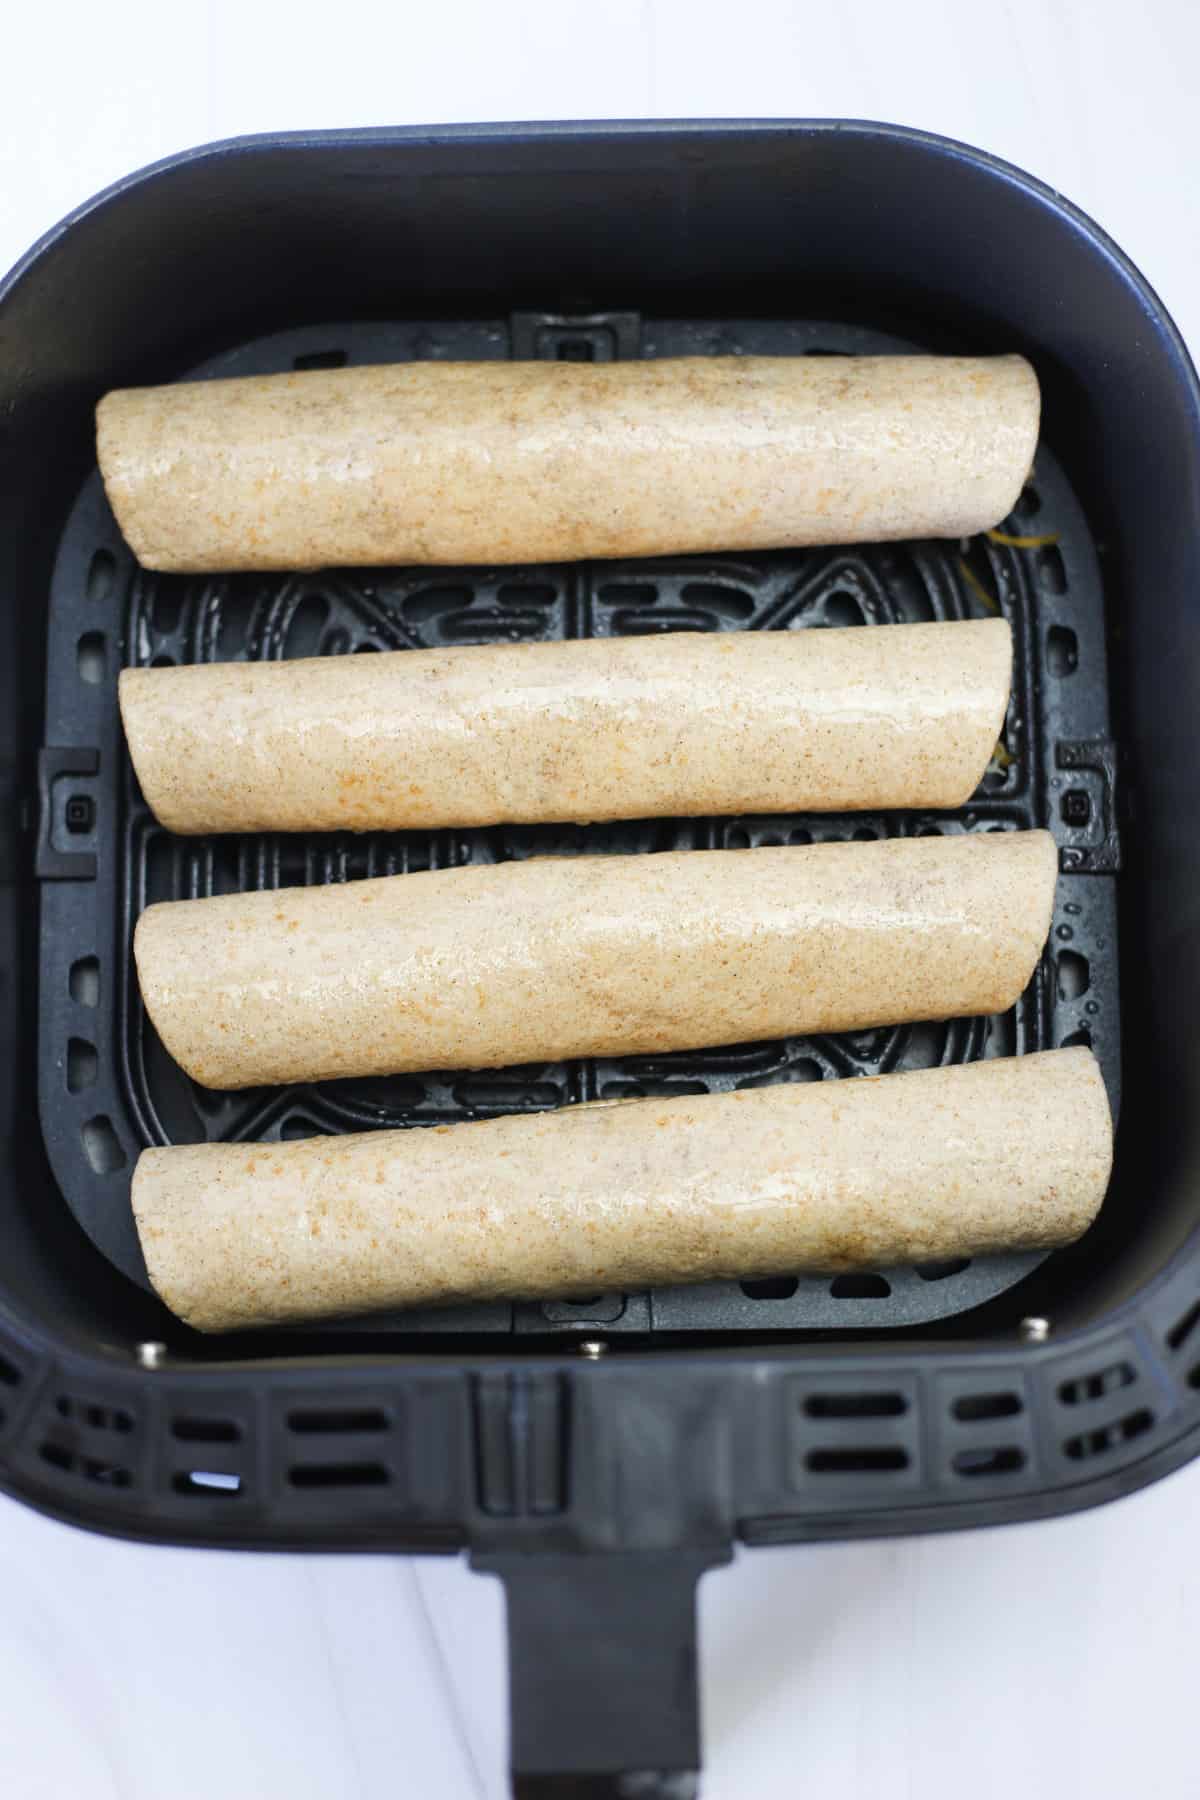 Taquitos prepped and ready for the air fryer.